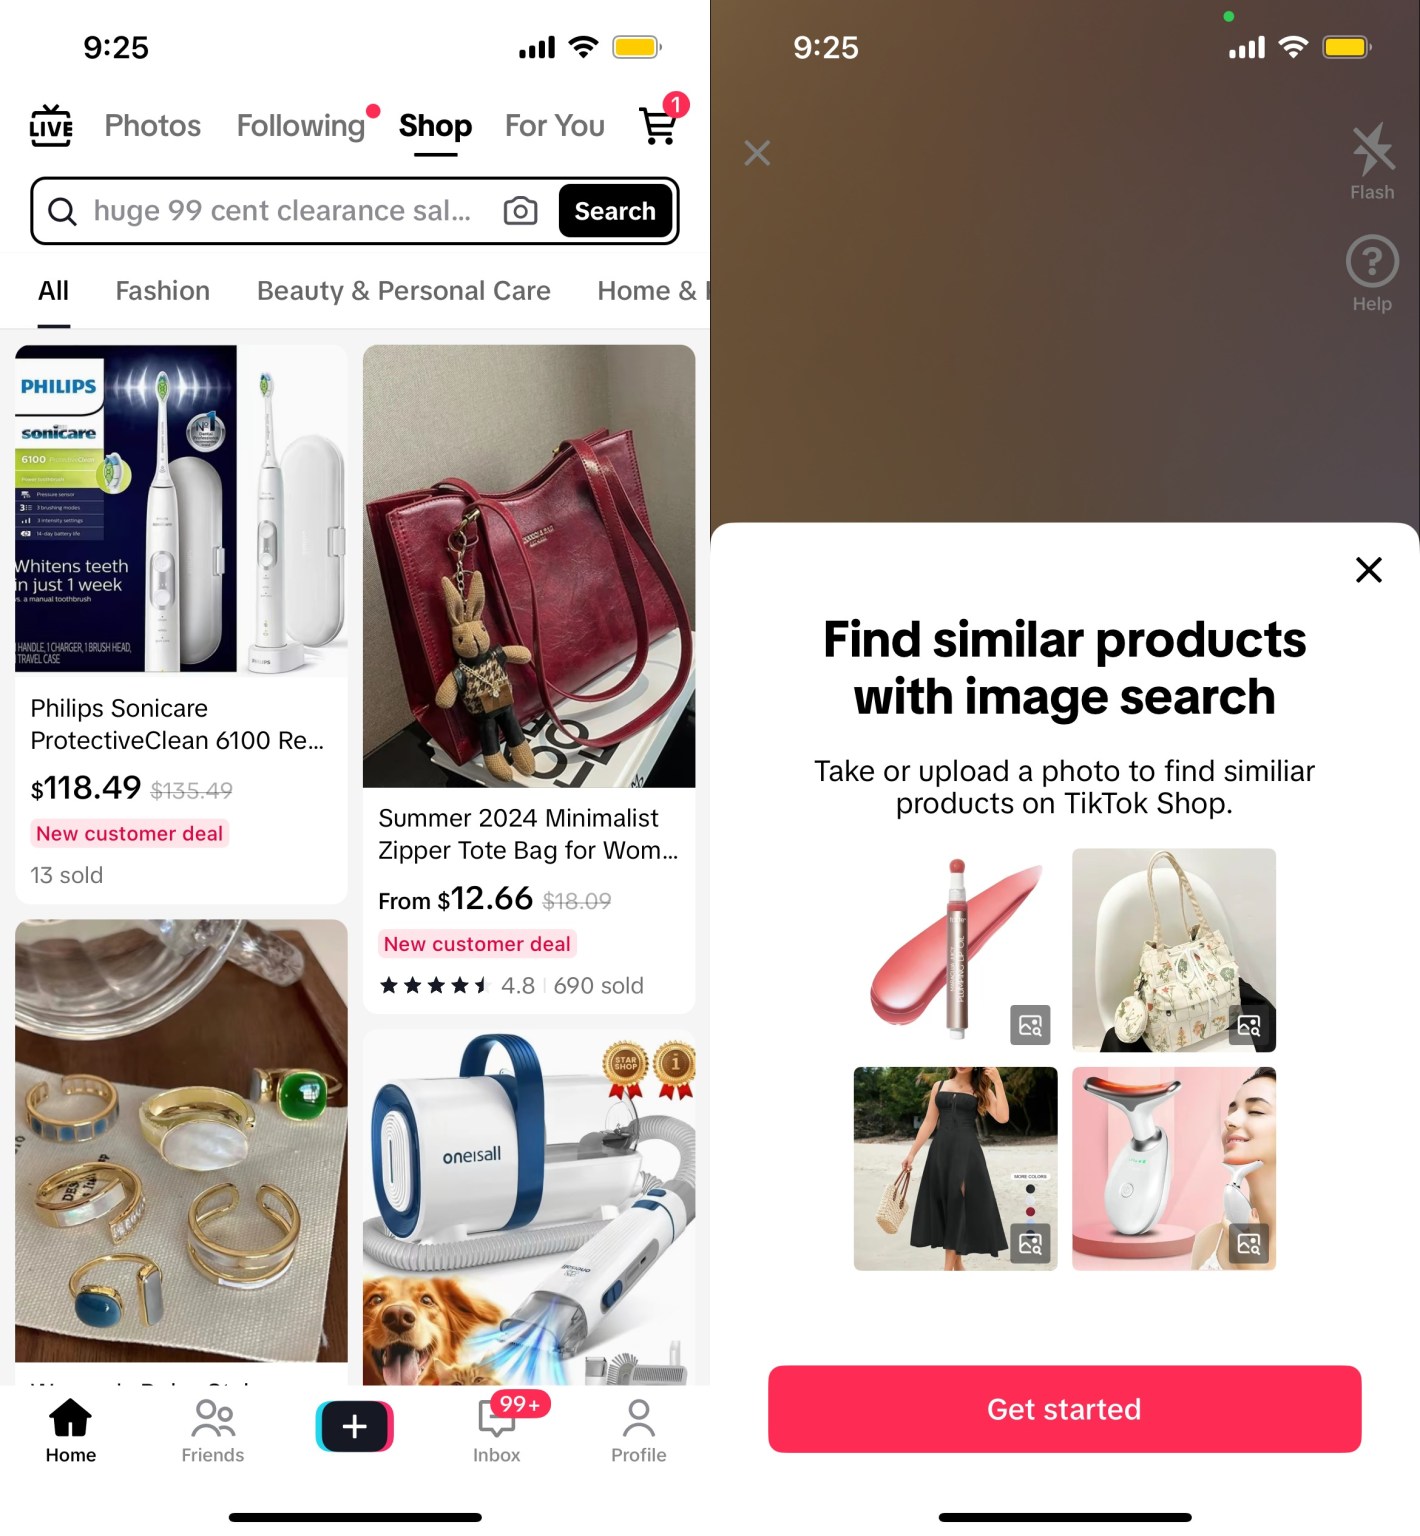 TikTok comes for Google as it quietly rolls out image search capabilities in TikTok Shop